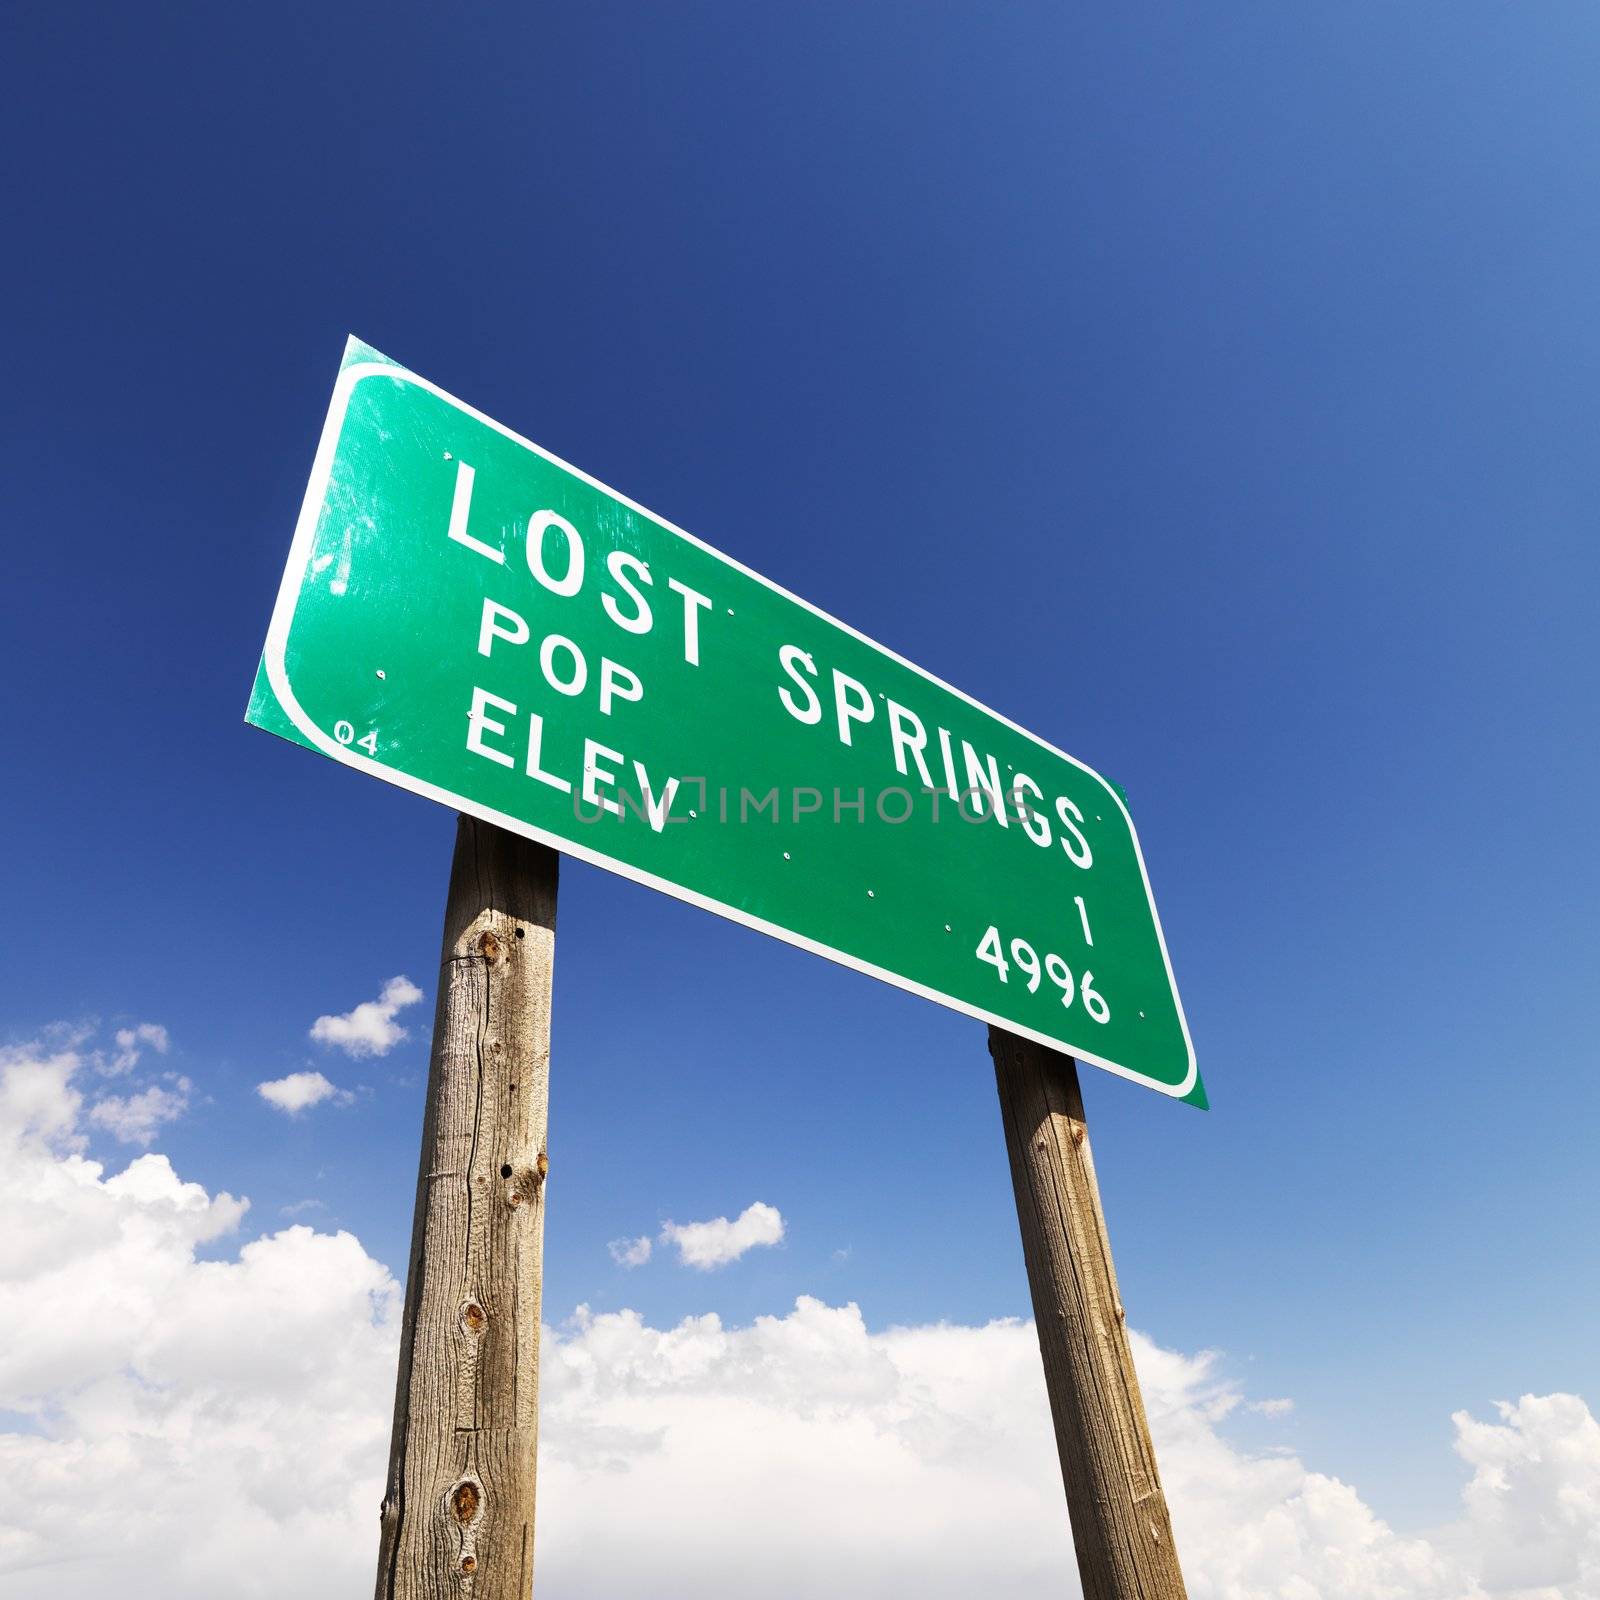 Lost Springs road sign. by iofoto